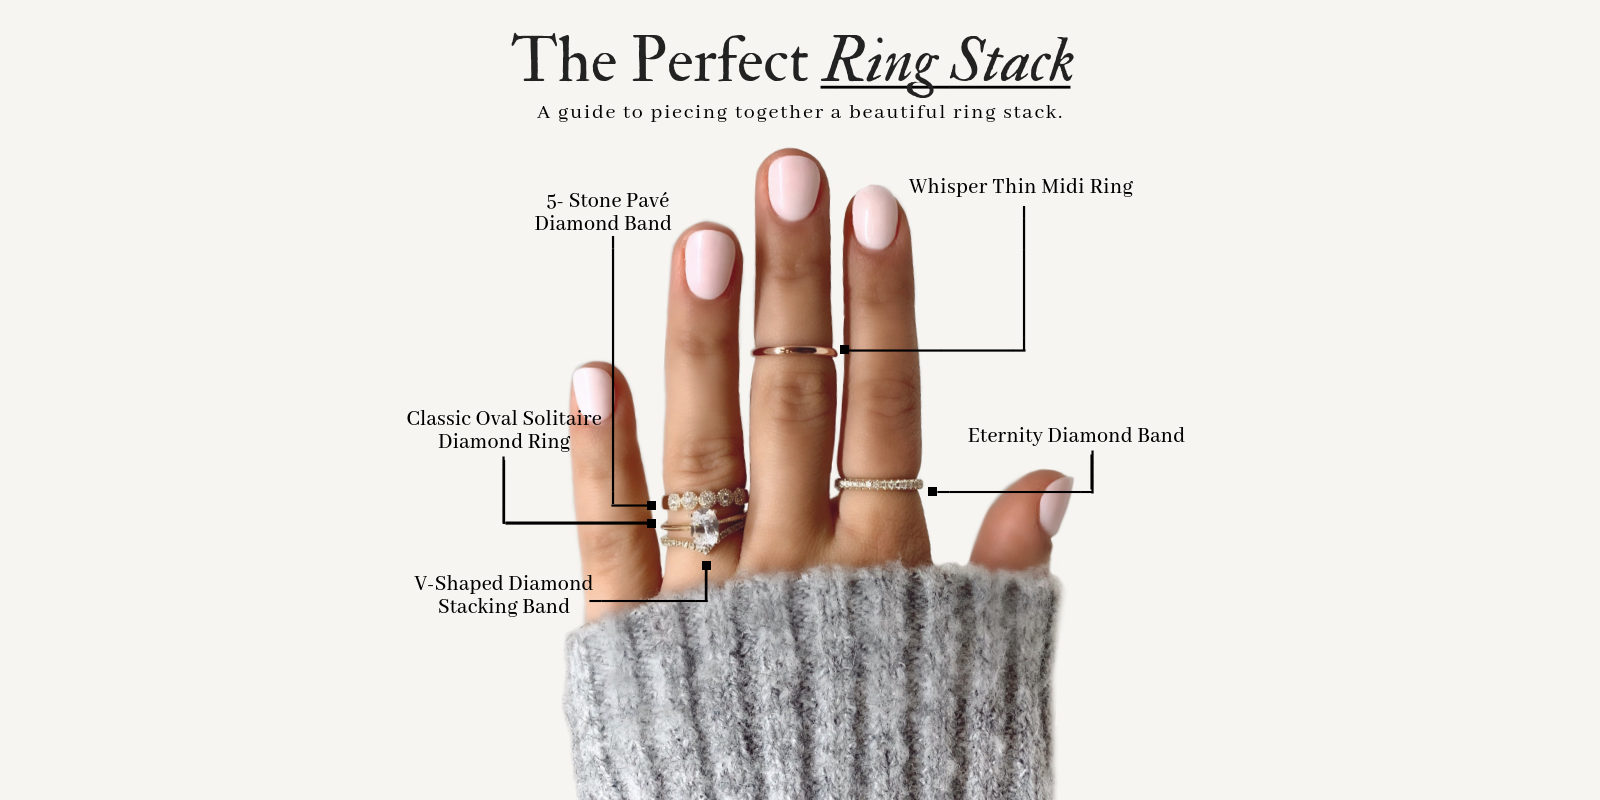 The Perfect Ring Stack